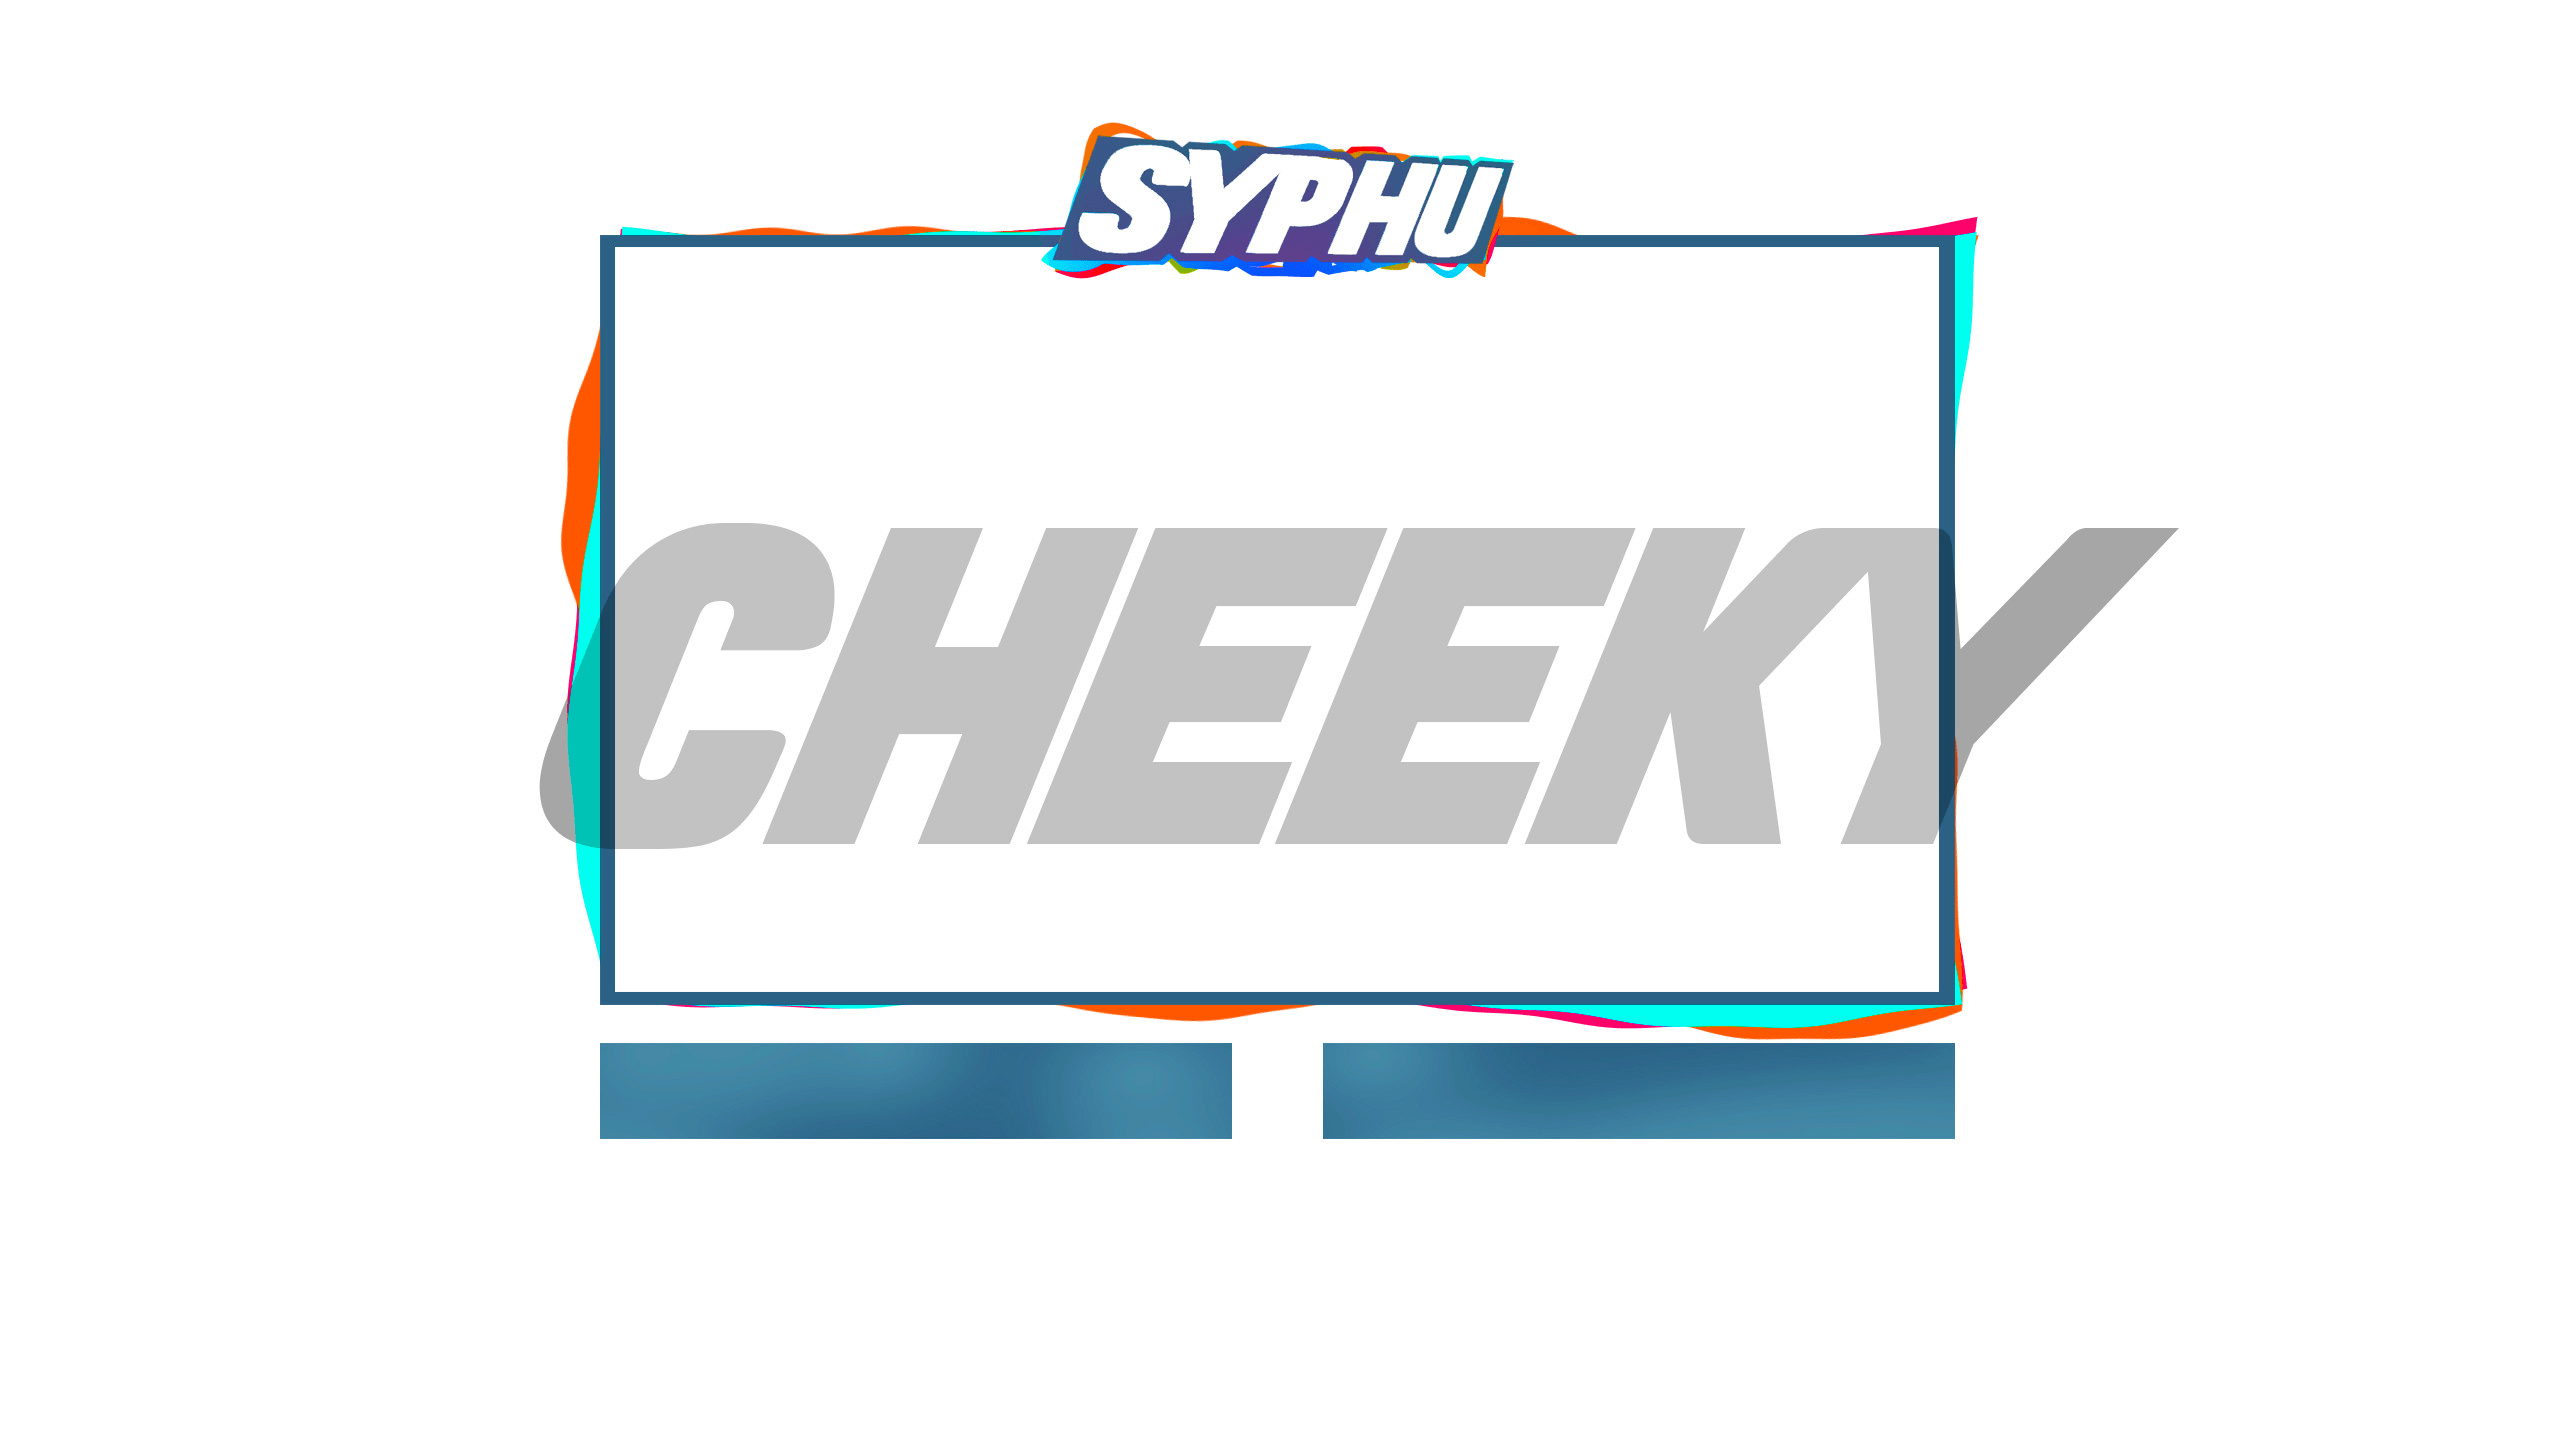 Design An Overlay For Your Twitch Streams By Cheekyvisuals - twitch roblox live streams